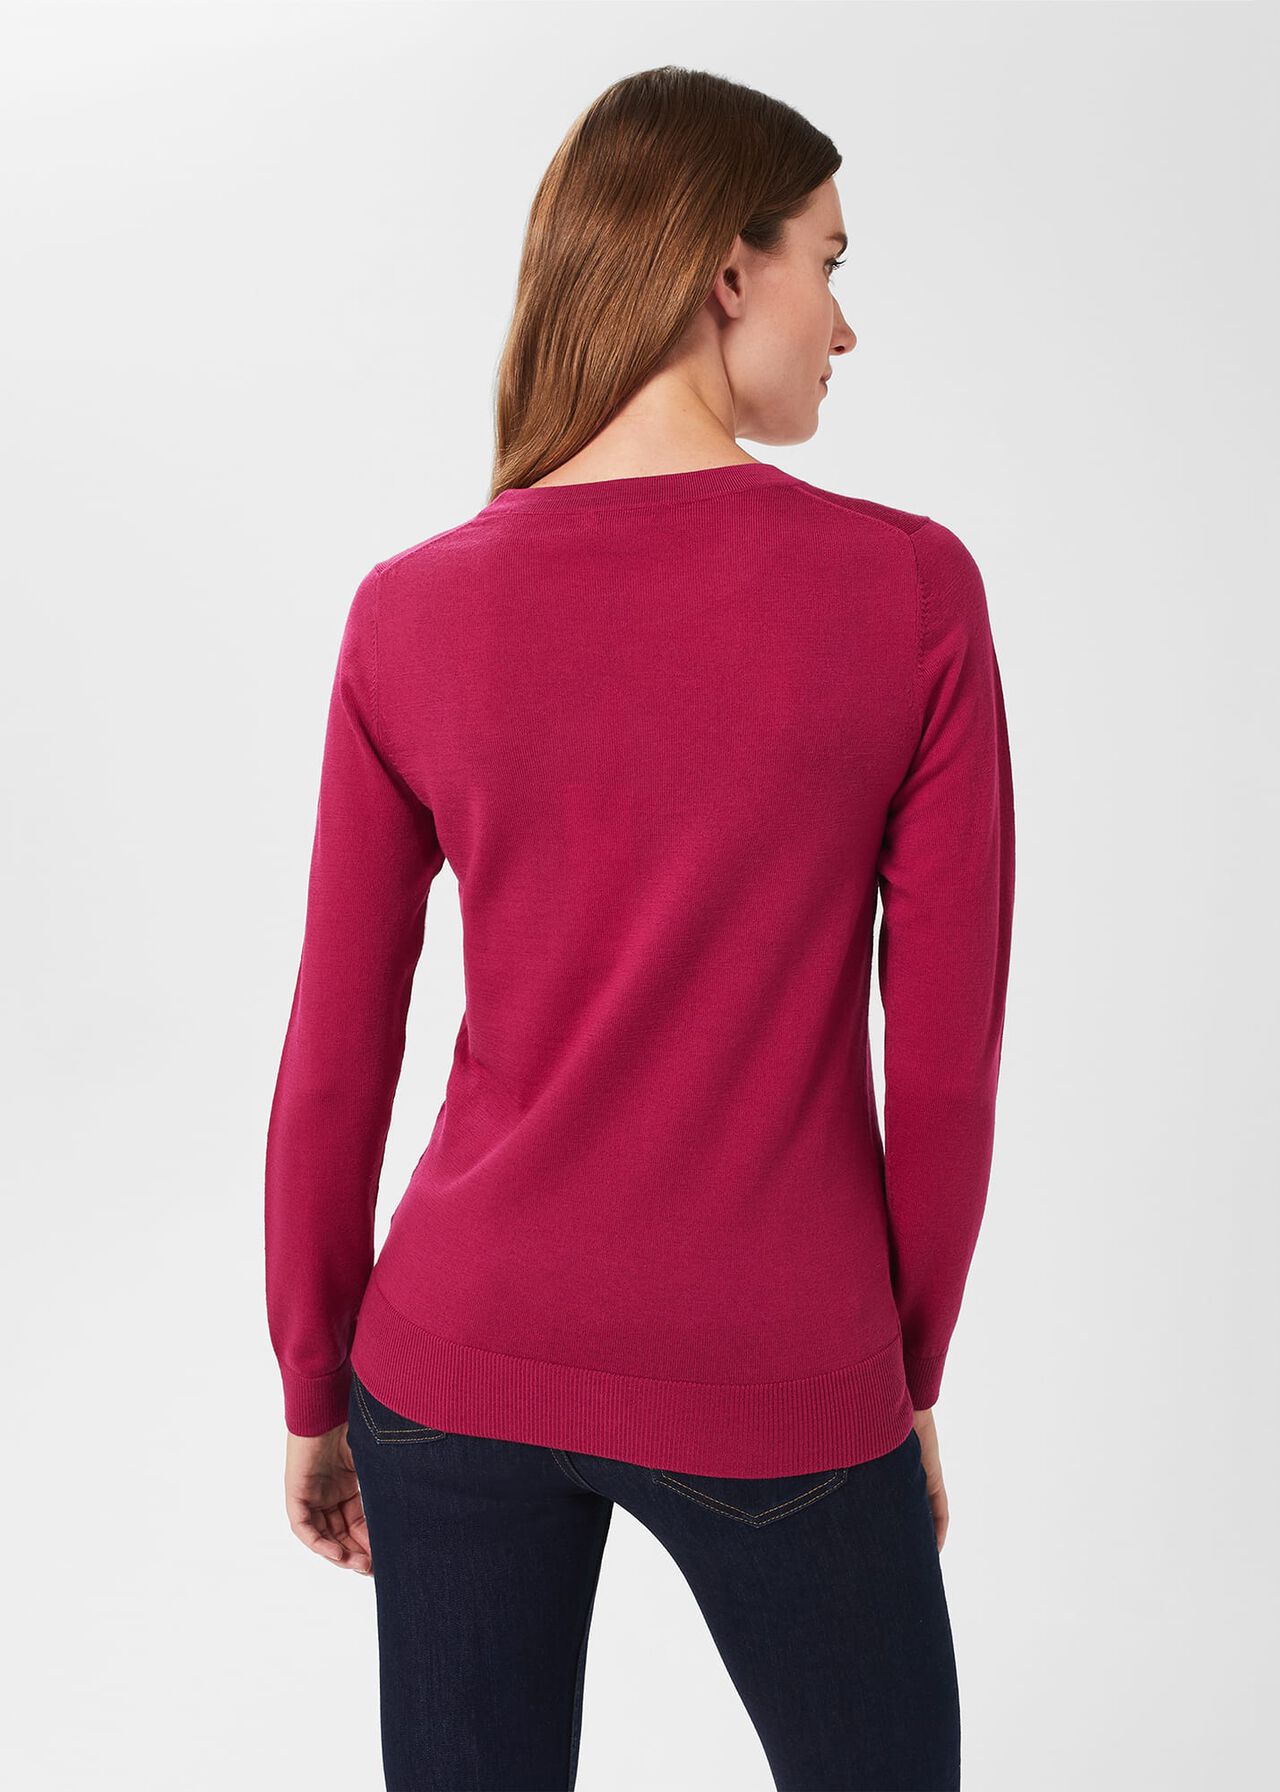 Penny Merino Jumper, Rich Berry Red, hi-res